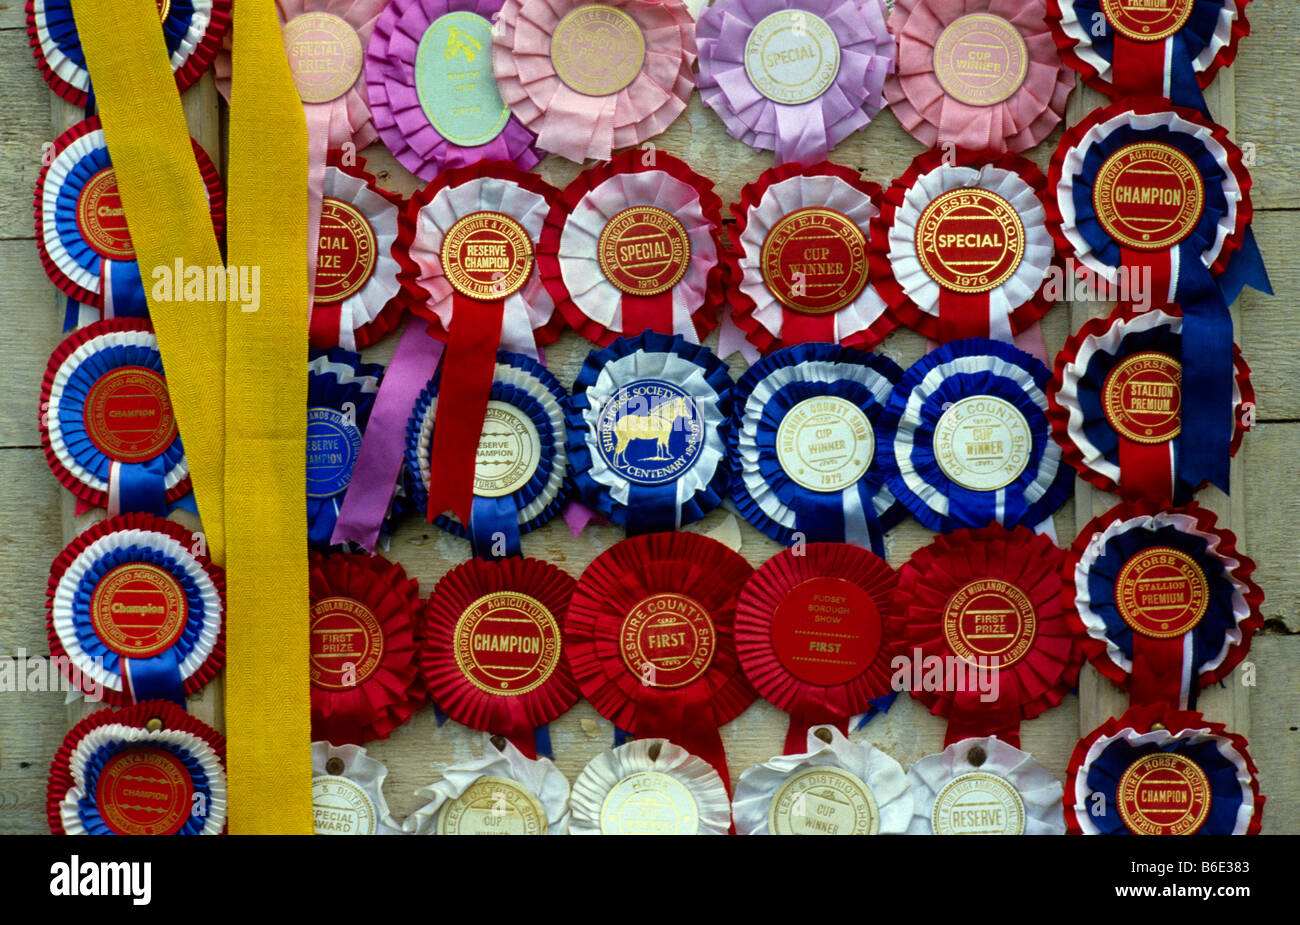 SALE NOW ON 5 sets 1st to 3rd star point rosettes sets horse/dog 